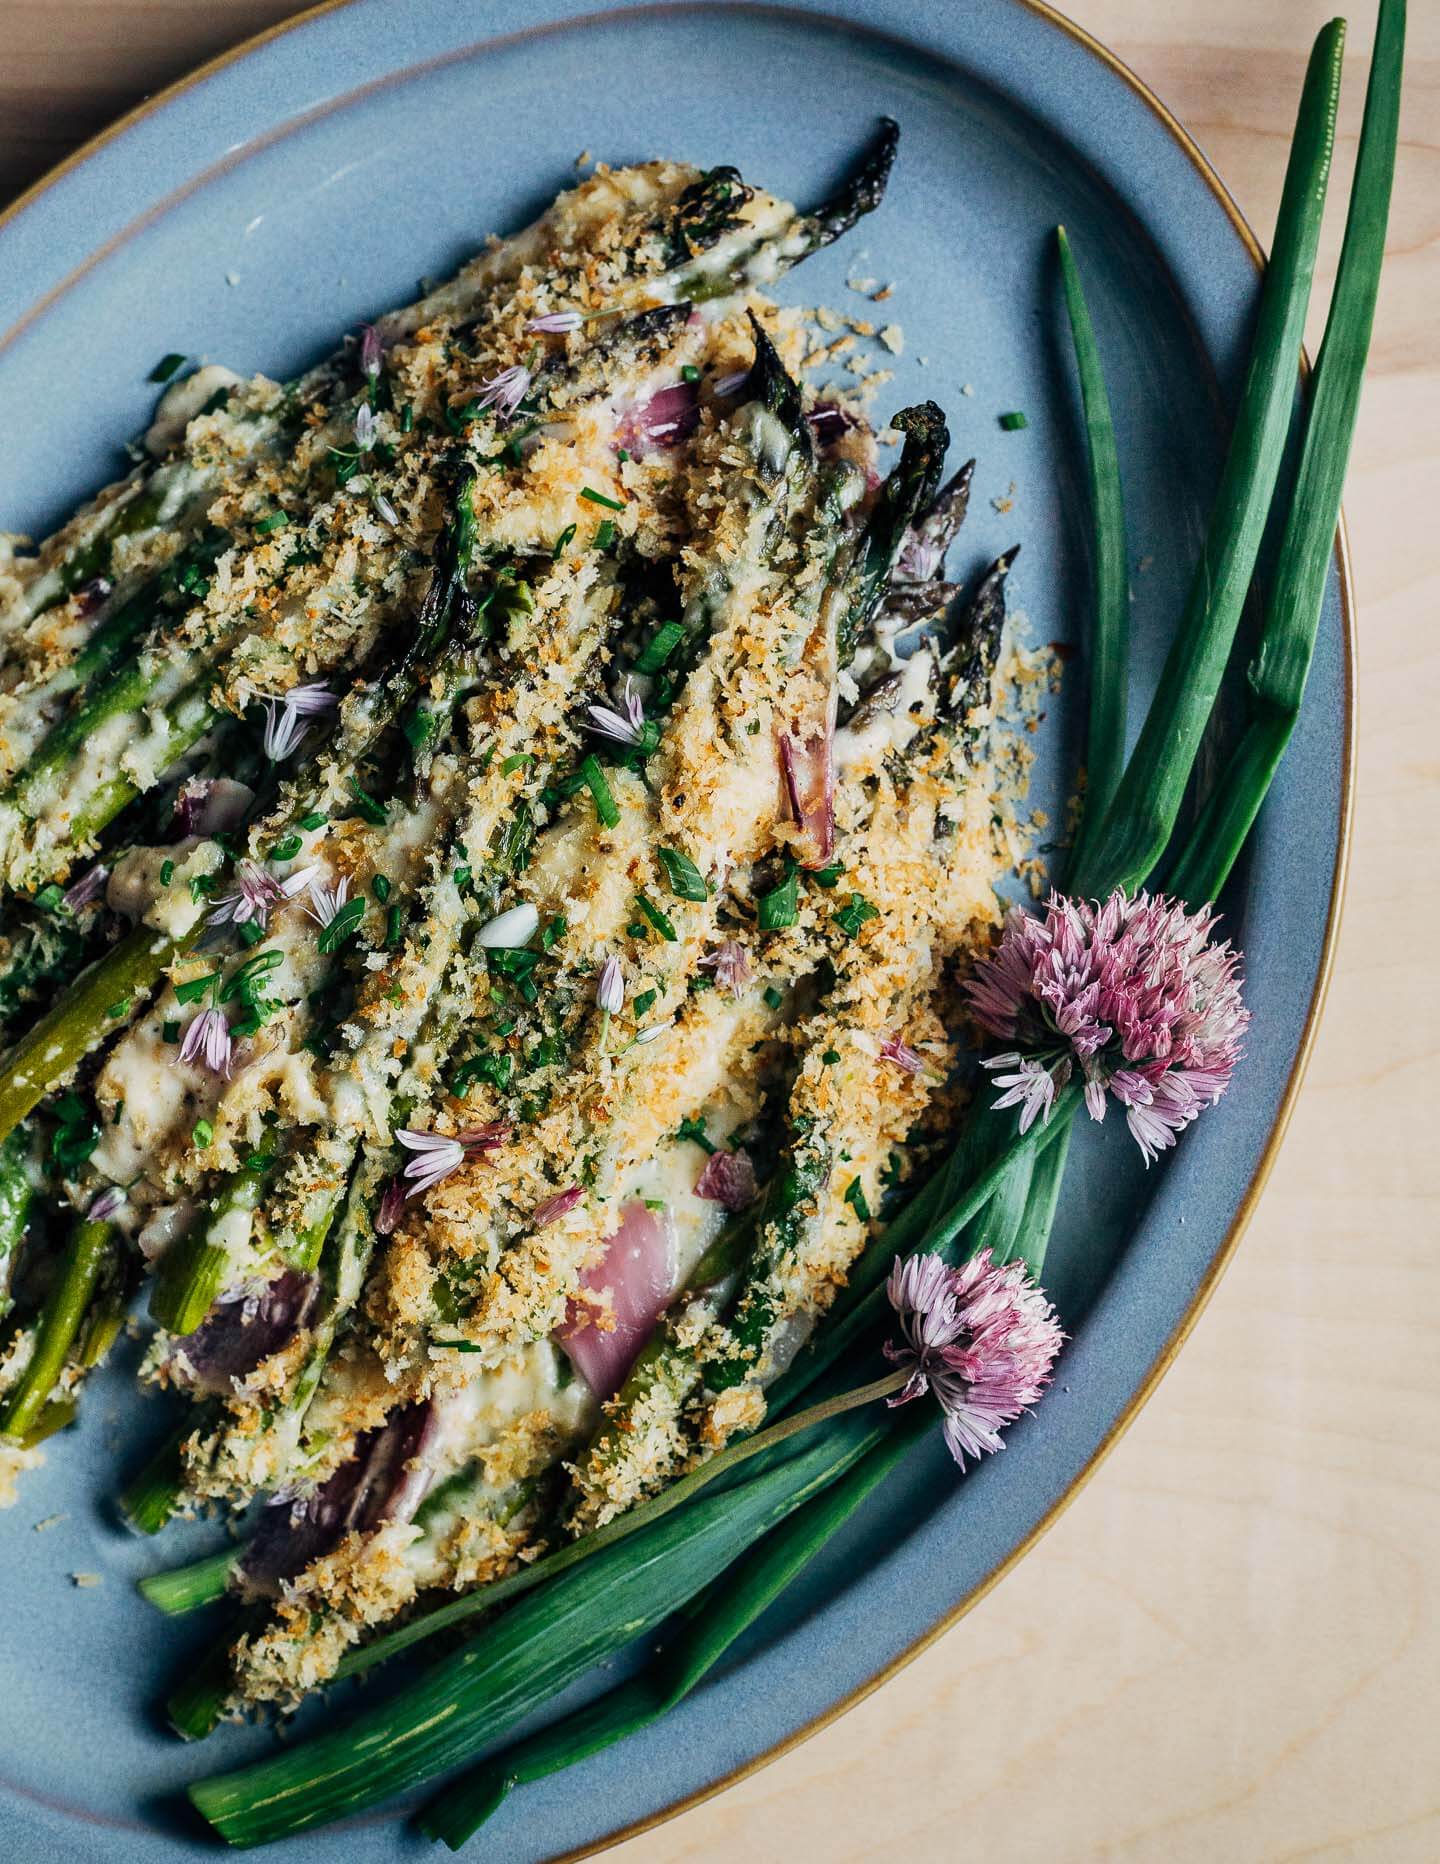 A blue patter with asparagus gratin and chive blossom and spring onion garnishes